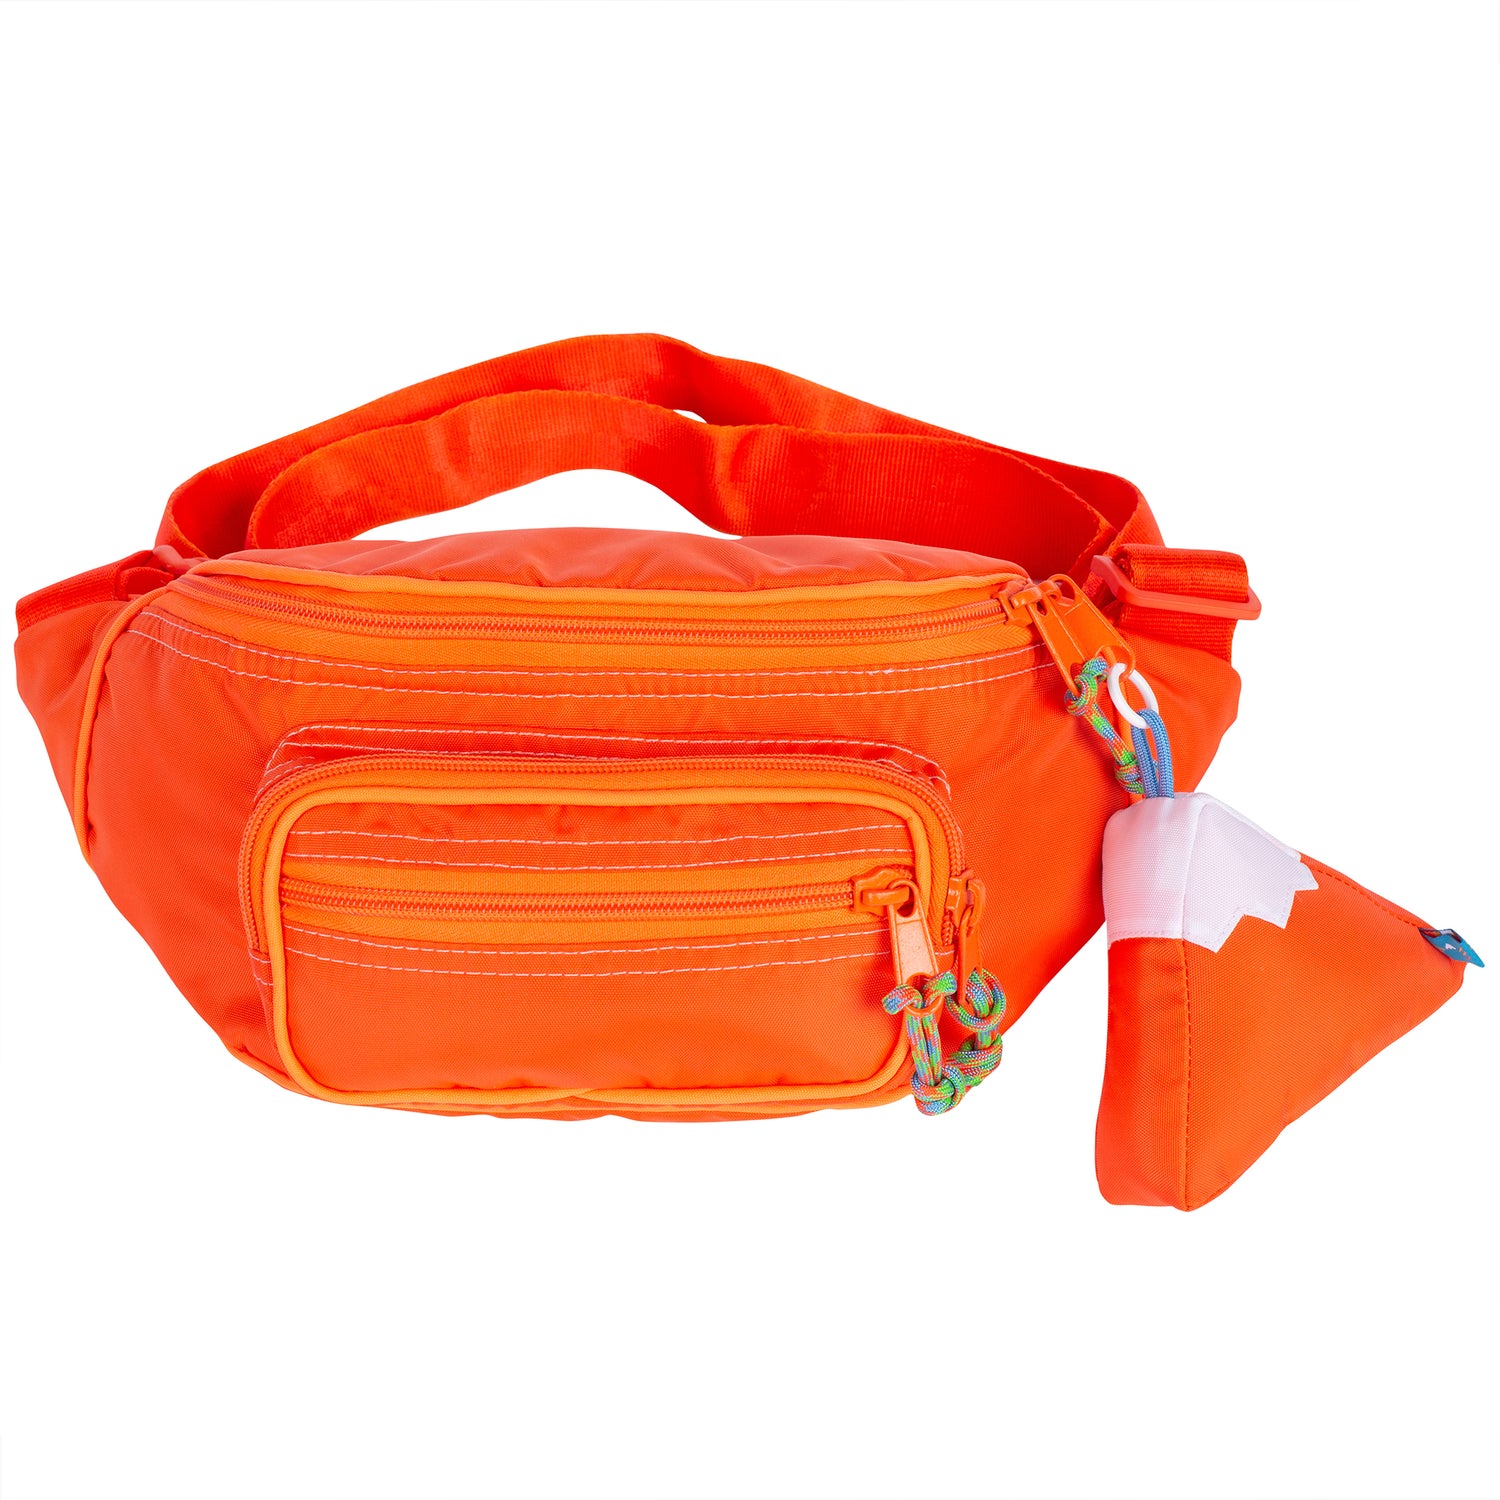 Large fanny pack sling in an orange color with a mountain design keychain